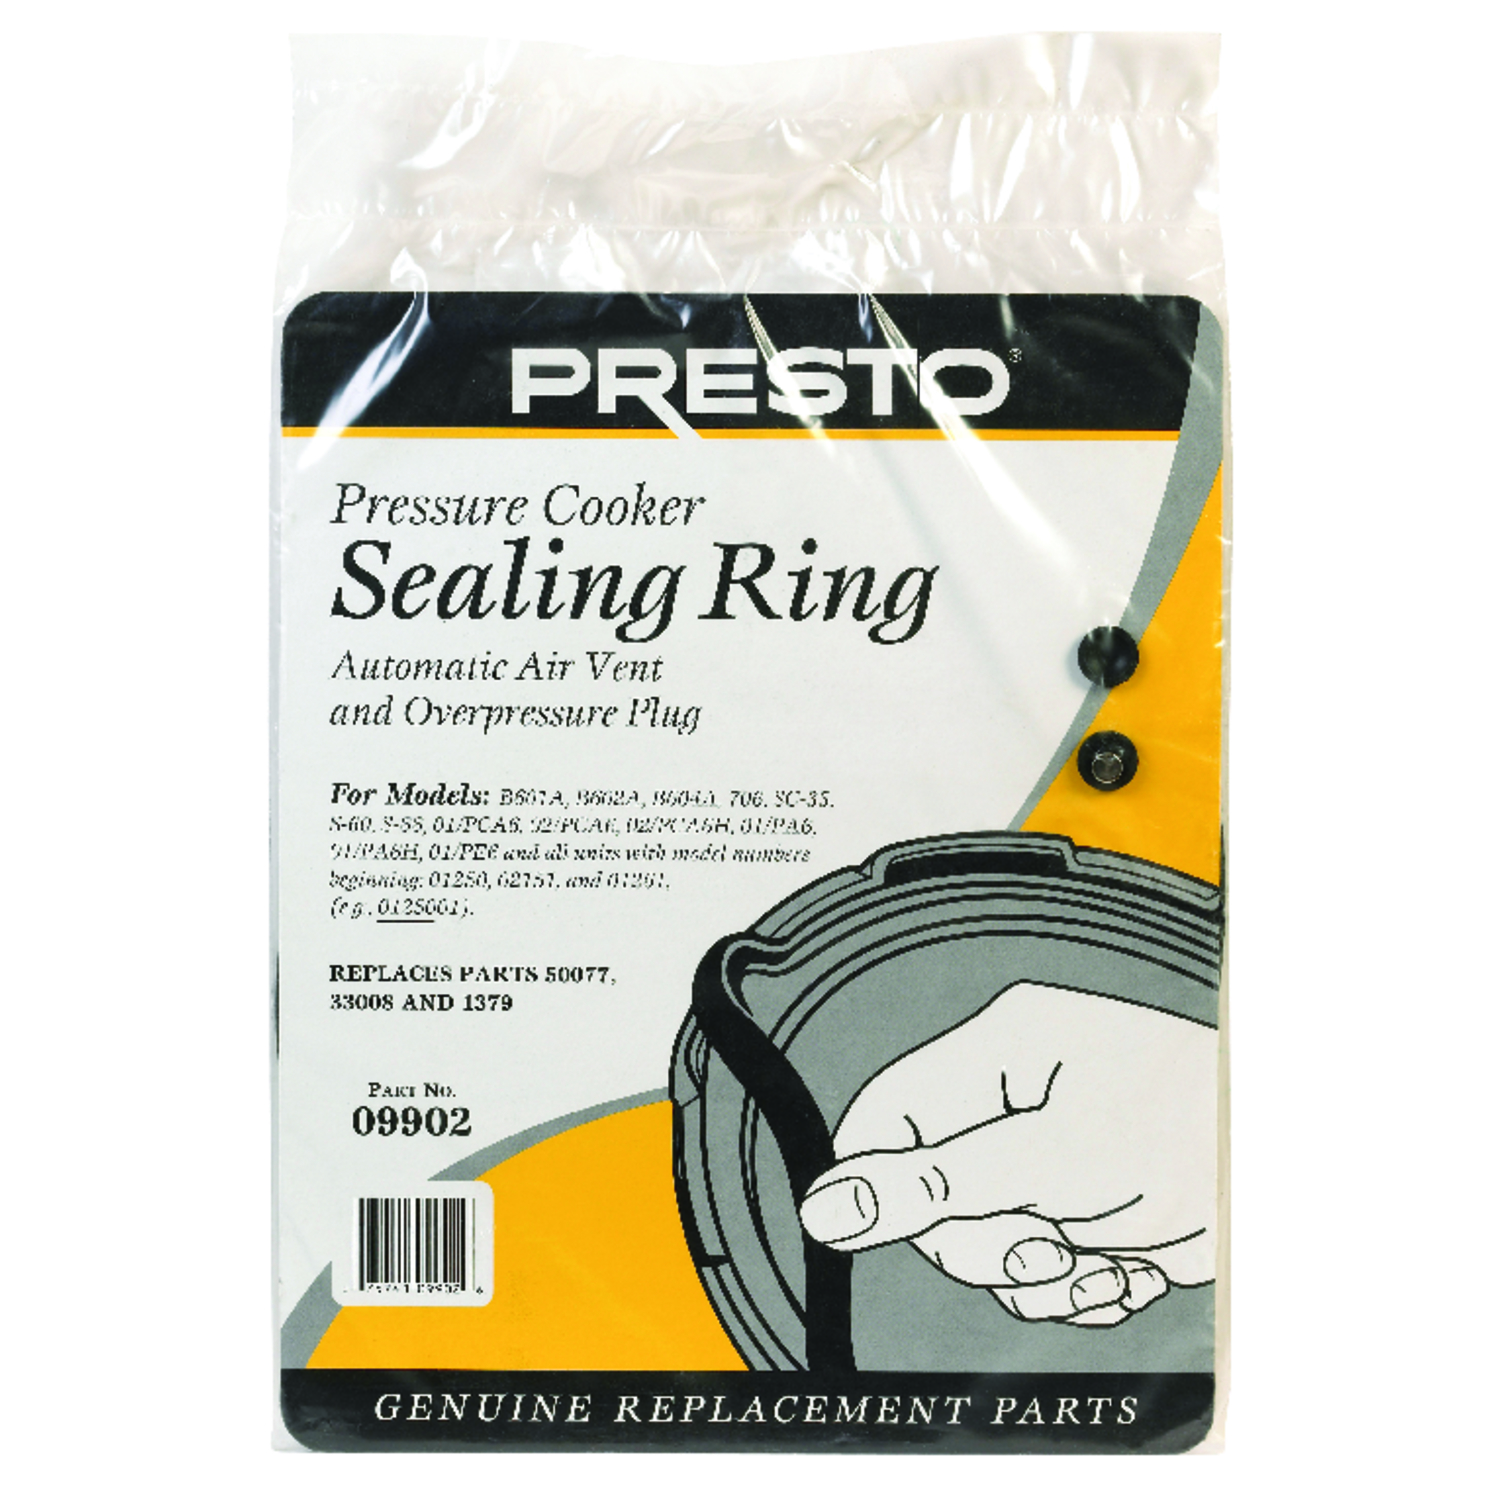 Photos - Other Accessories Presto Rubber Pressure Cooker Sealing Ring 6 qt 09902 